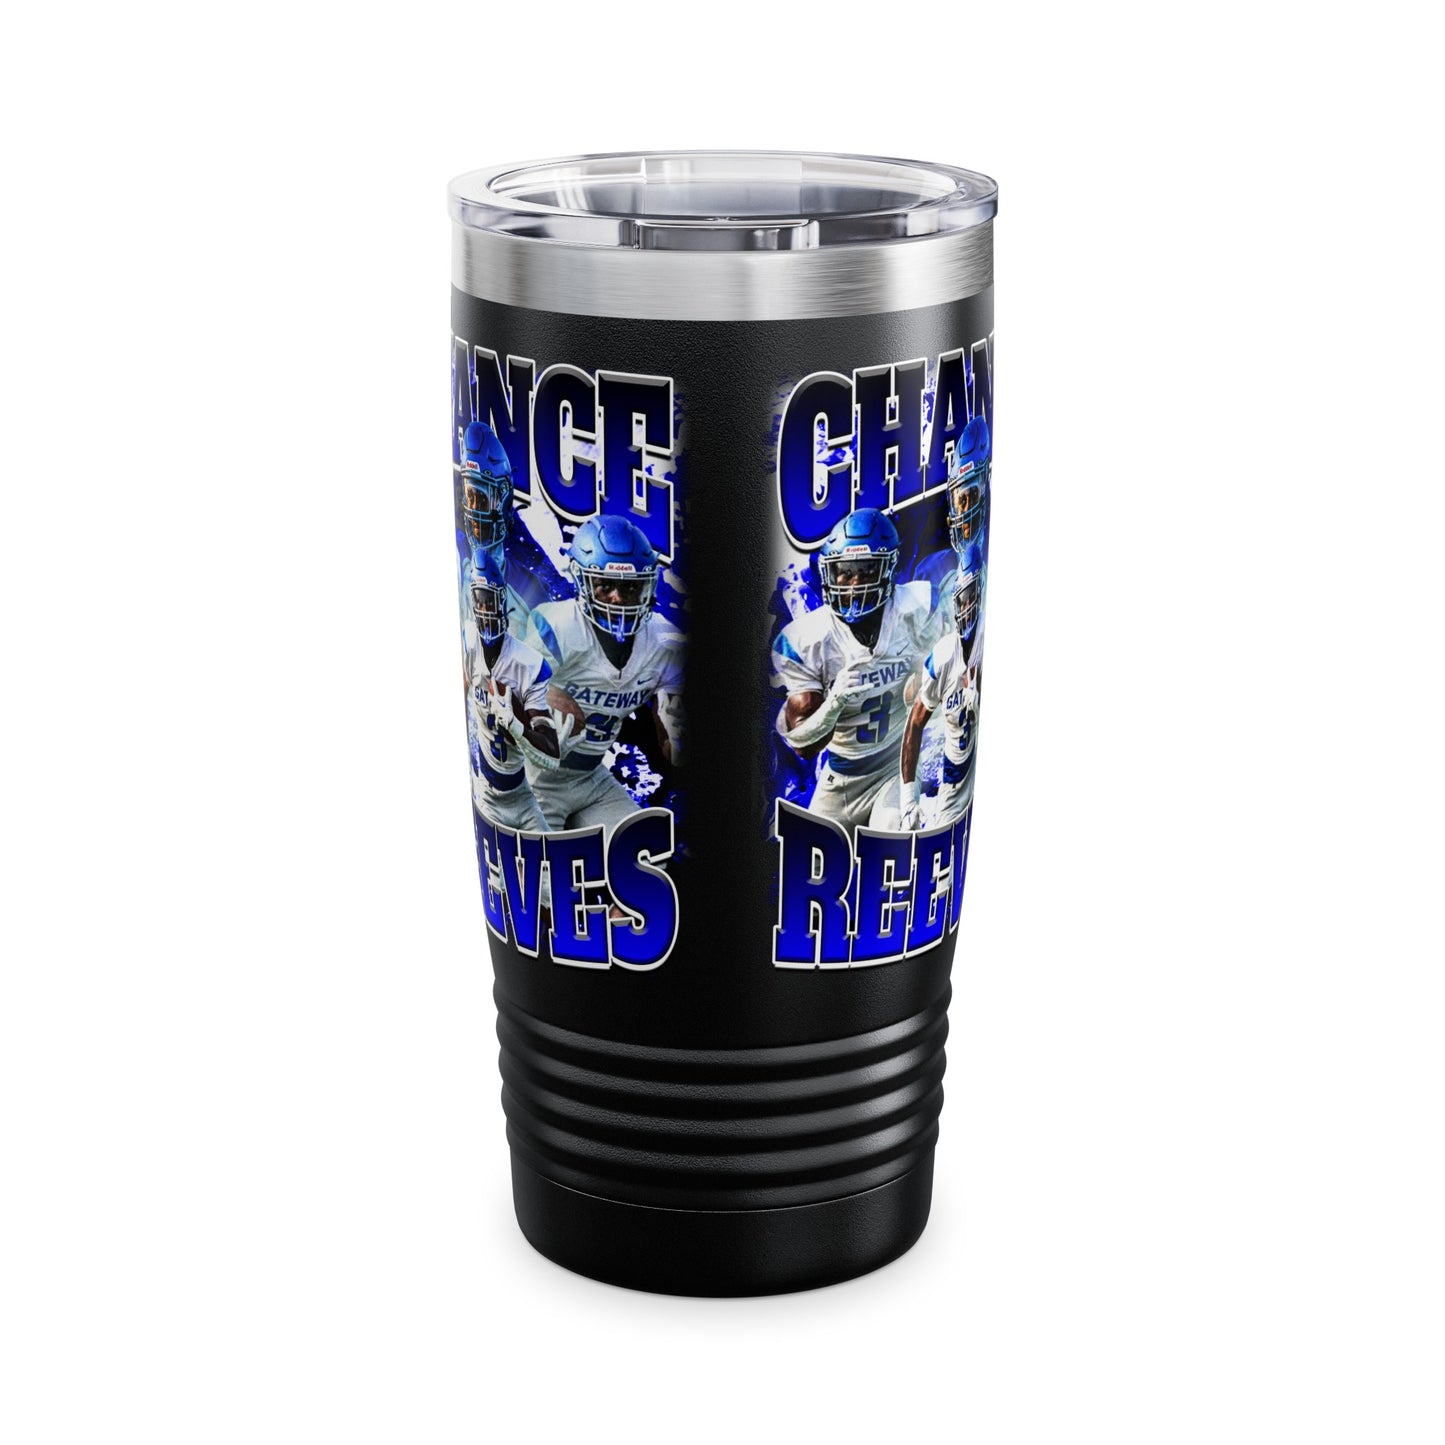 Chance Reeves Stainless Steal Tumbler